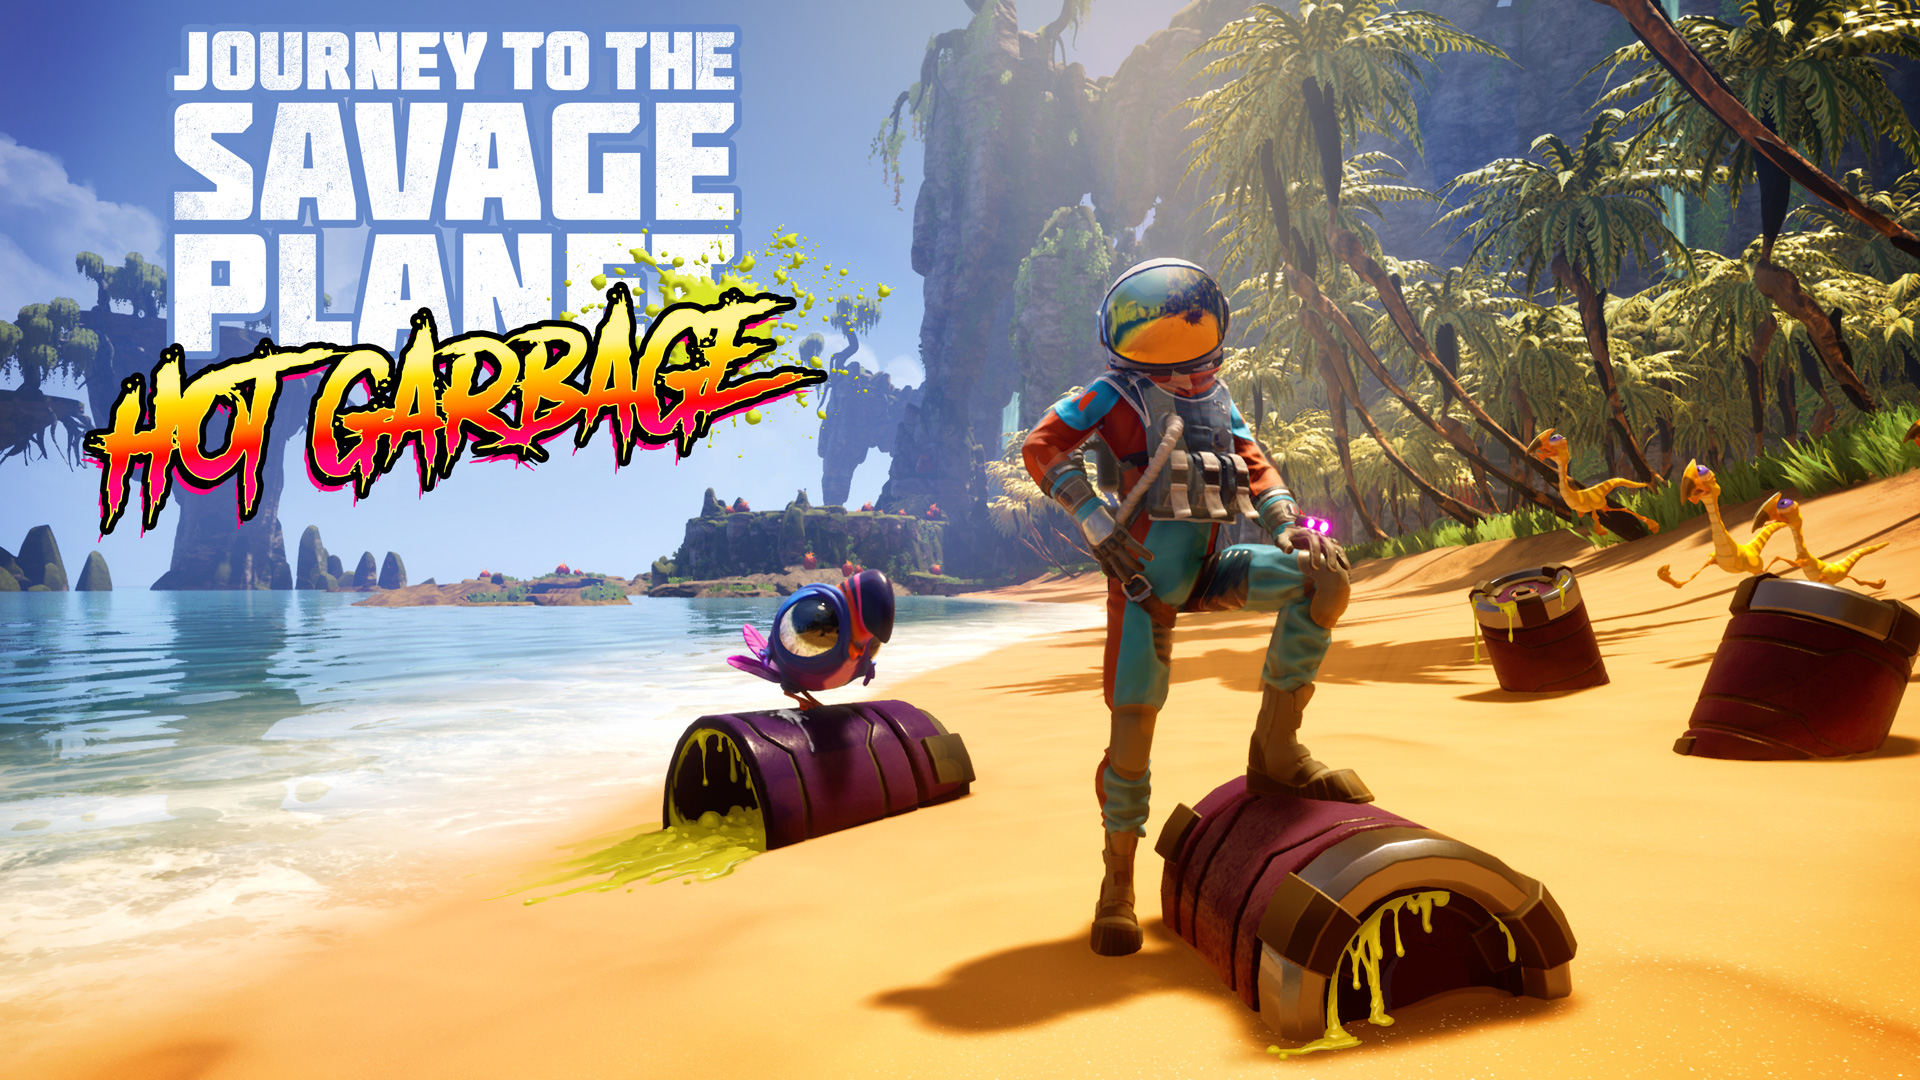 Journey to the Savage Planet - Hot Garbage Key Art